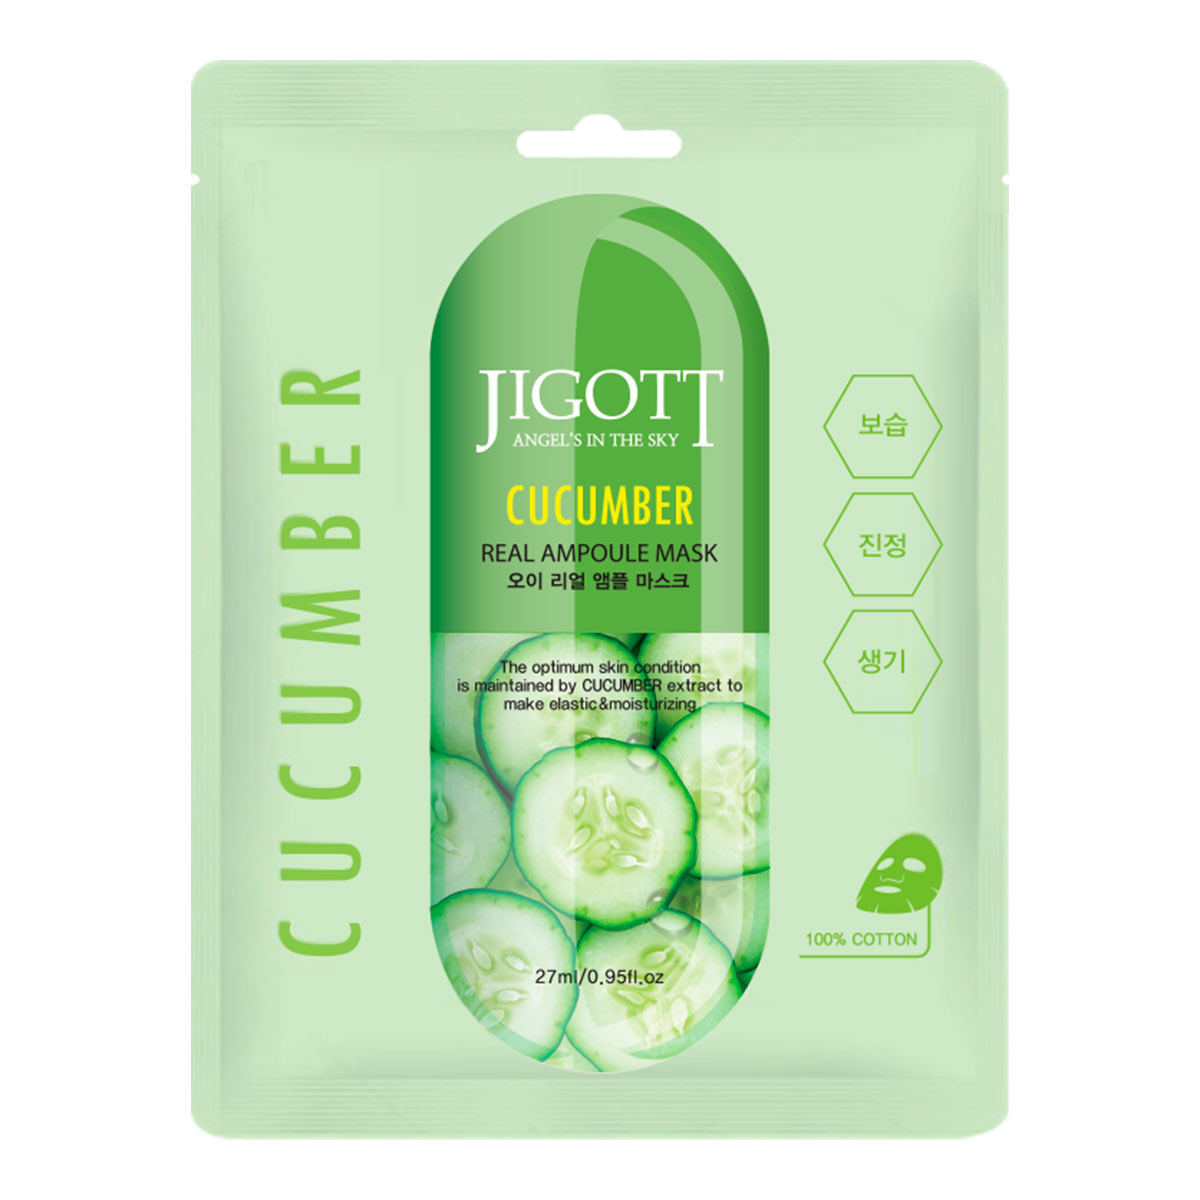 CUCUMBER REAL AMPOULE MASK